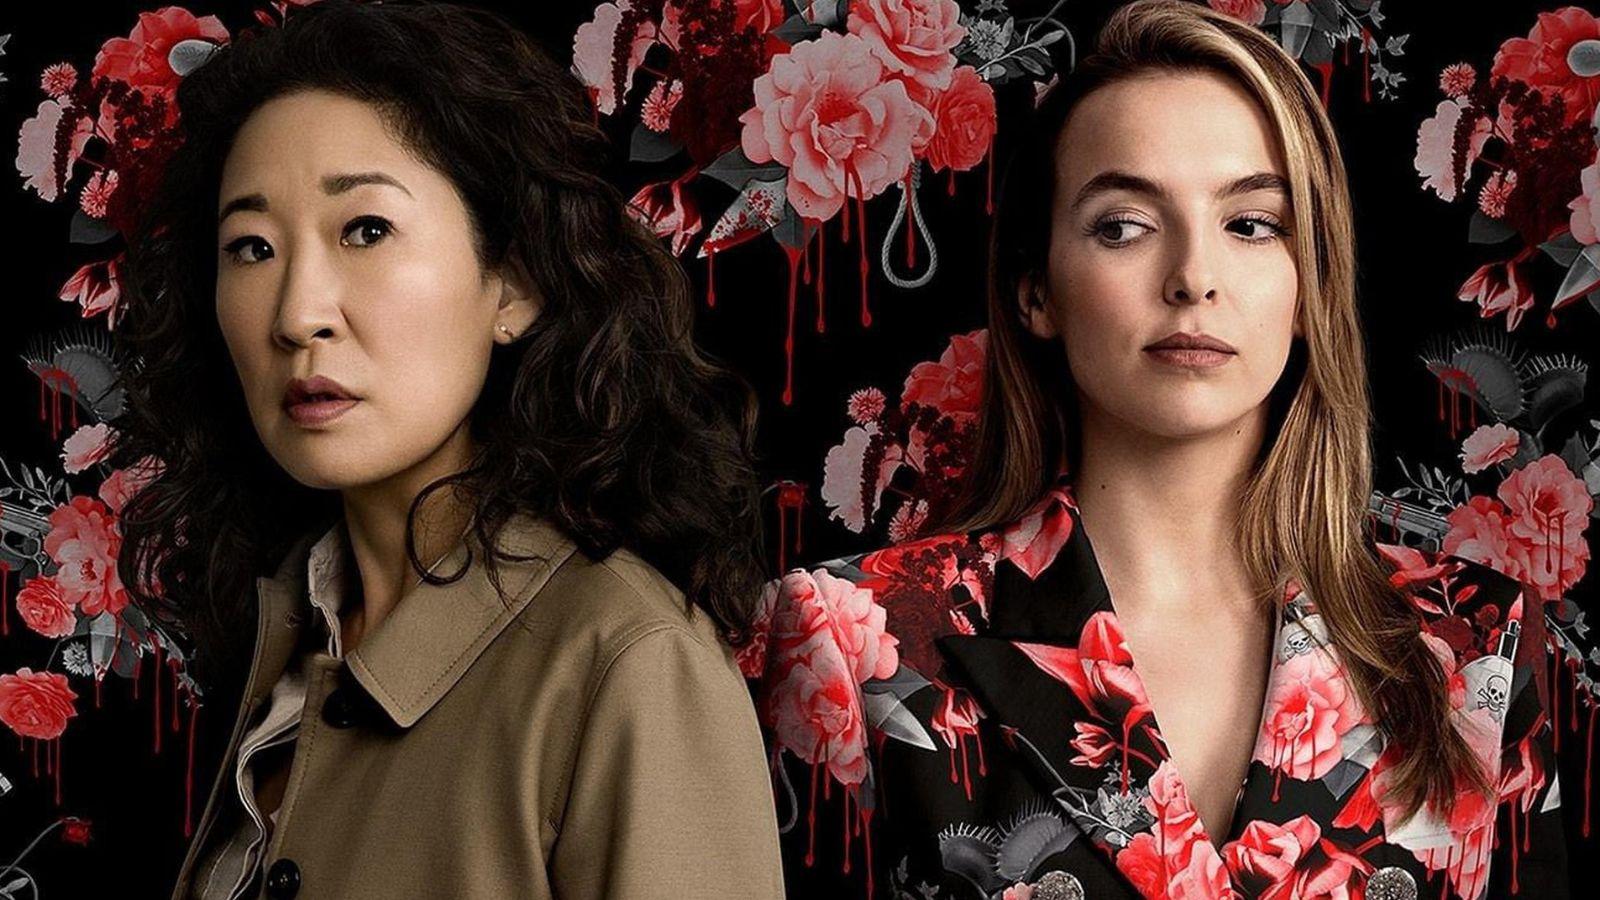 A promo poster for Killing Eve